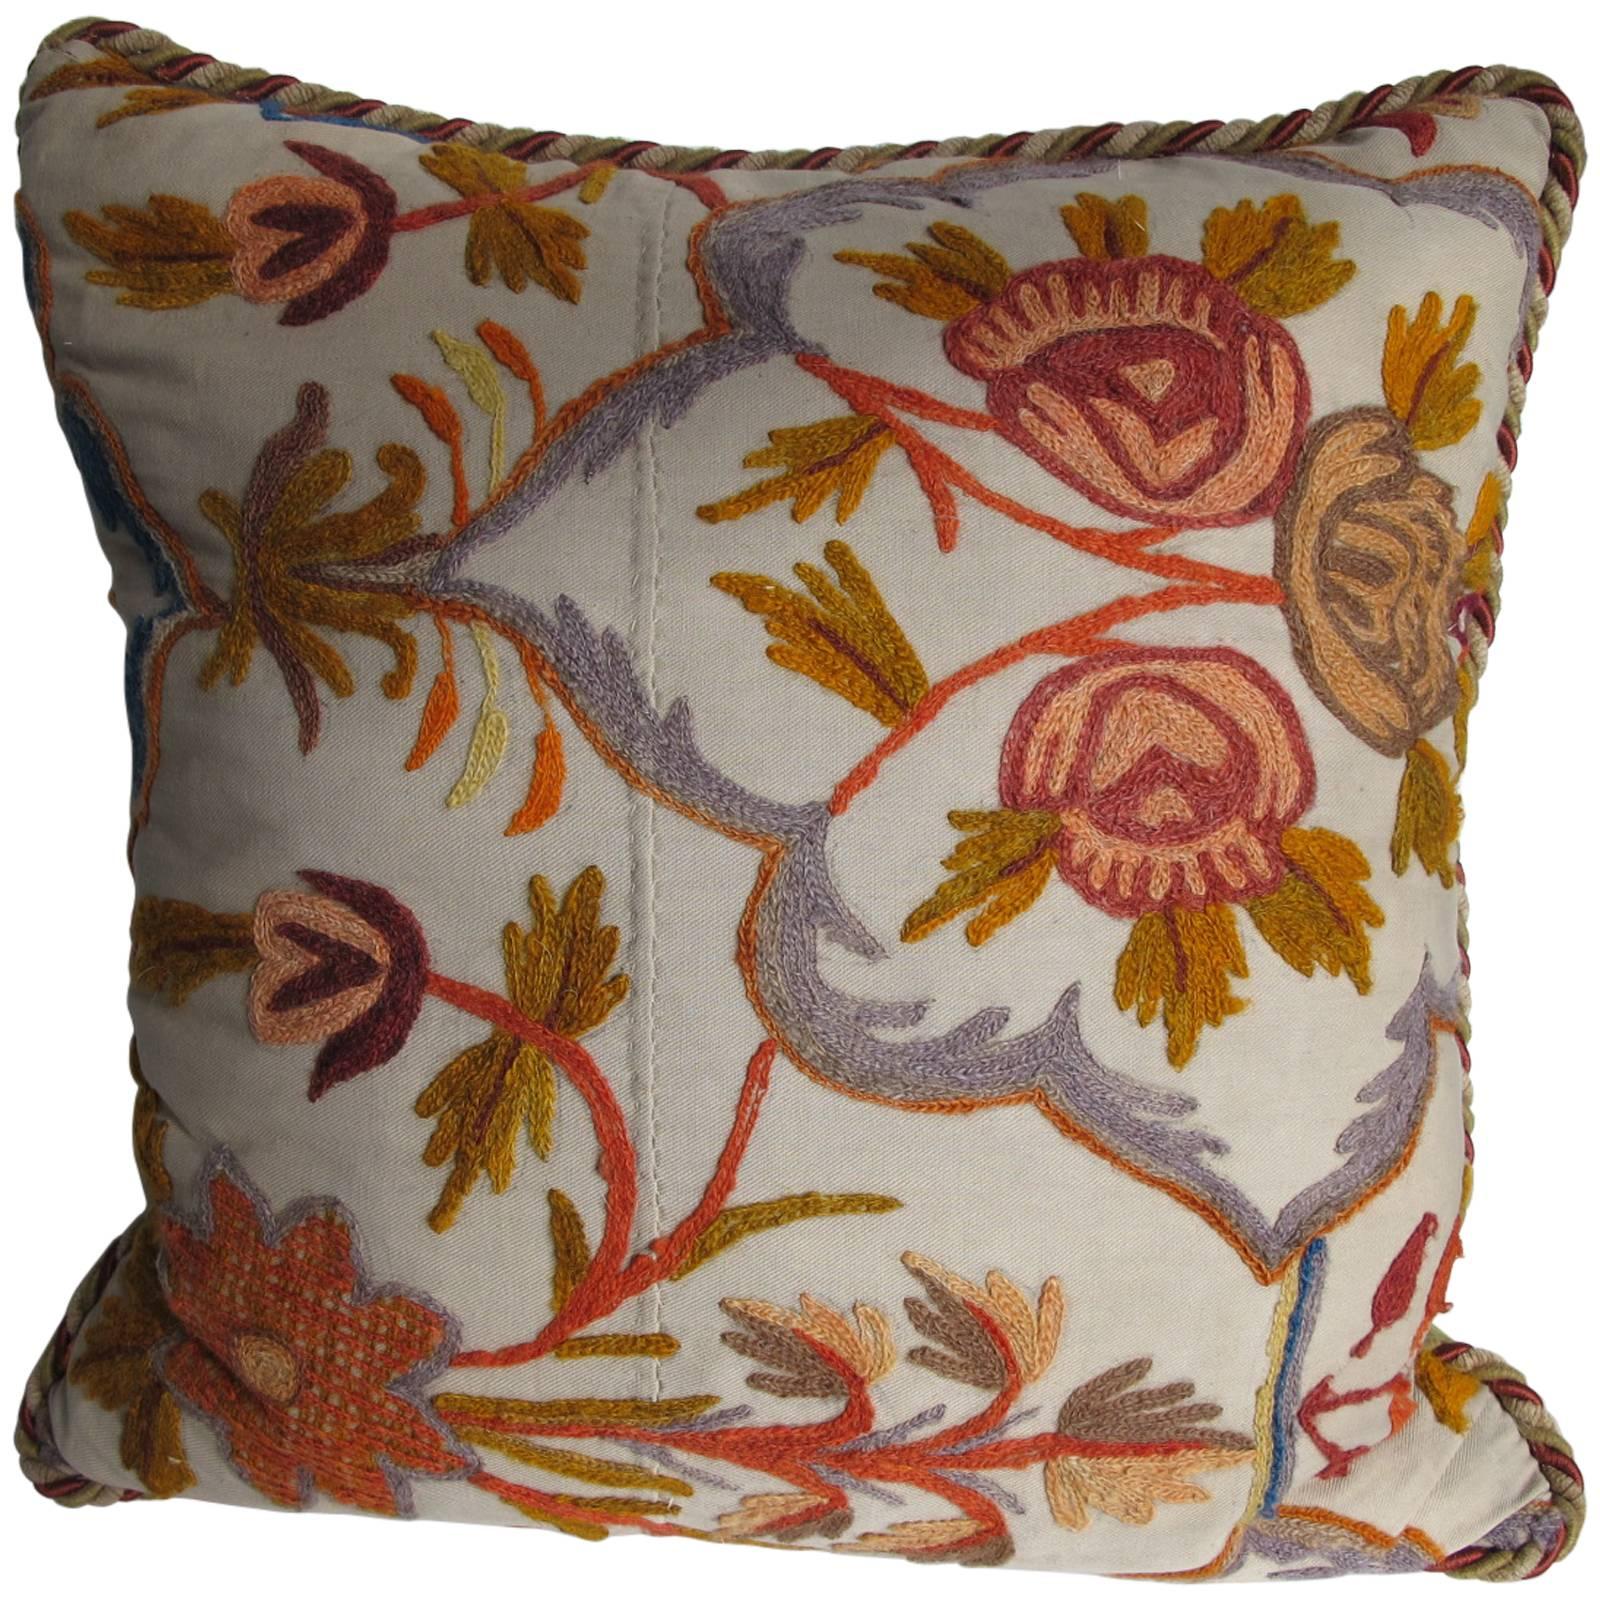 Early 20th Century Crewel Work Pillow by Mary Jane McCarty Design